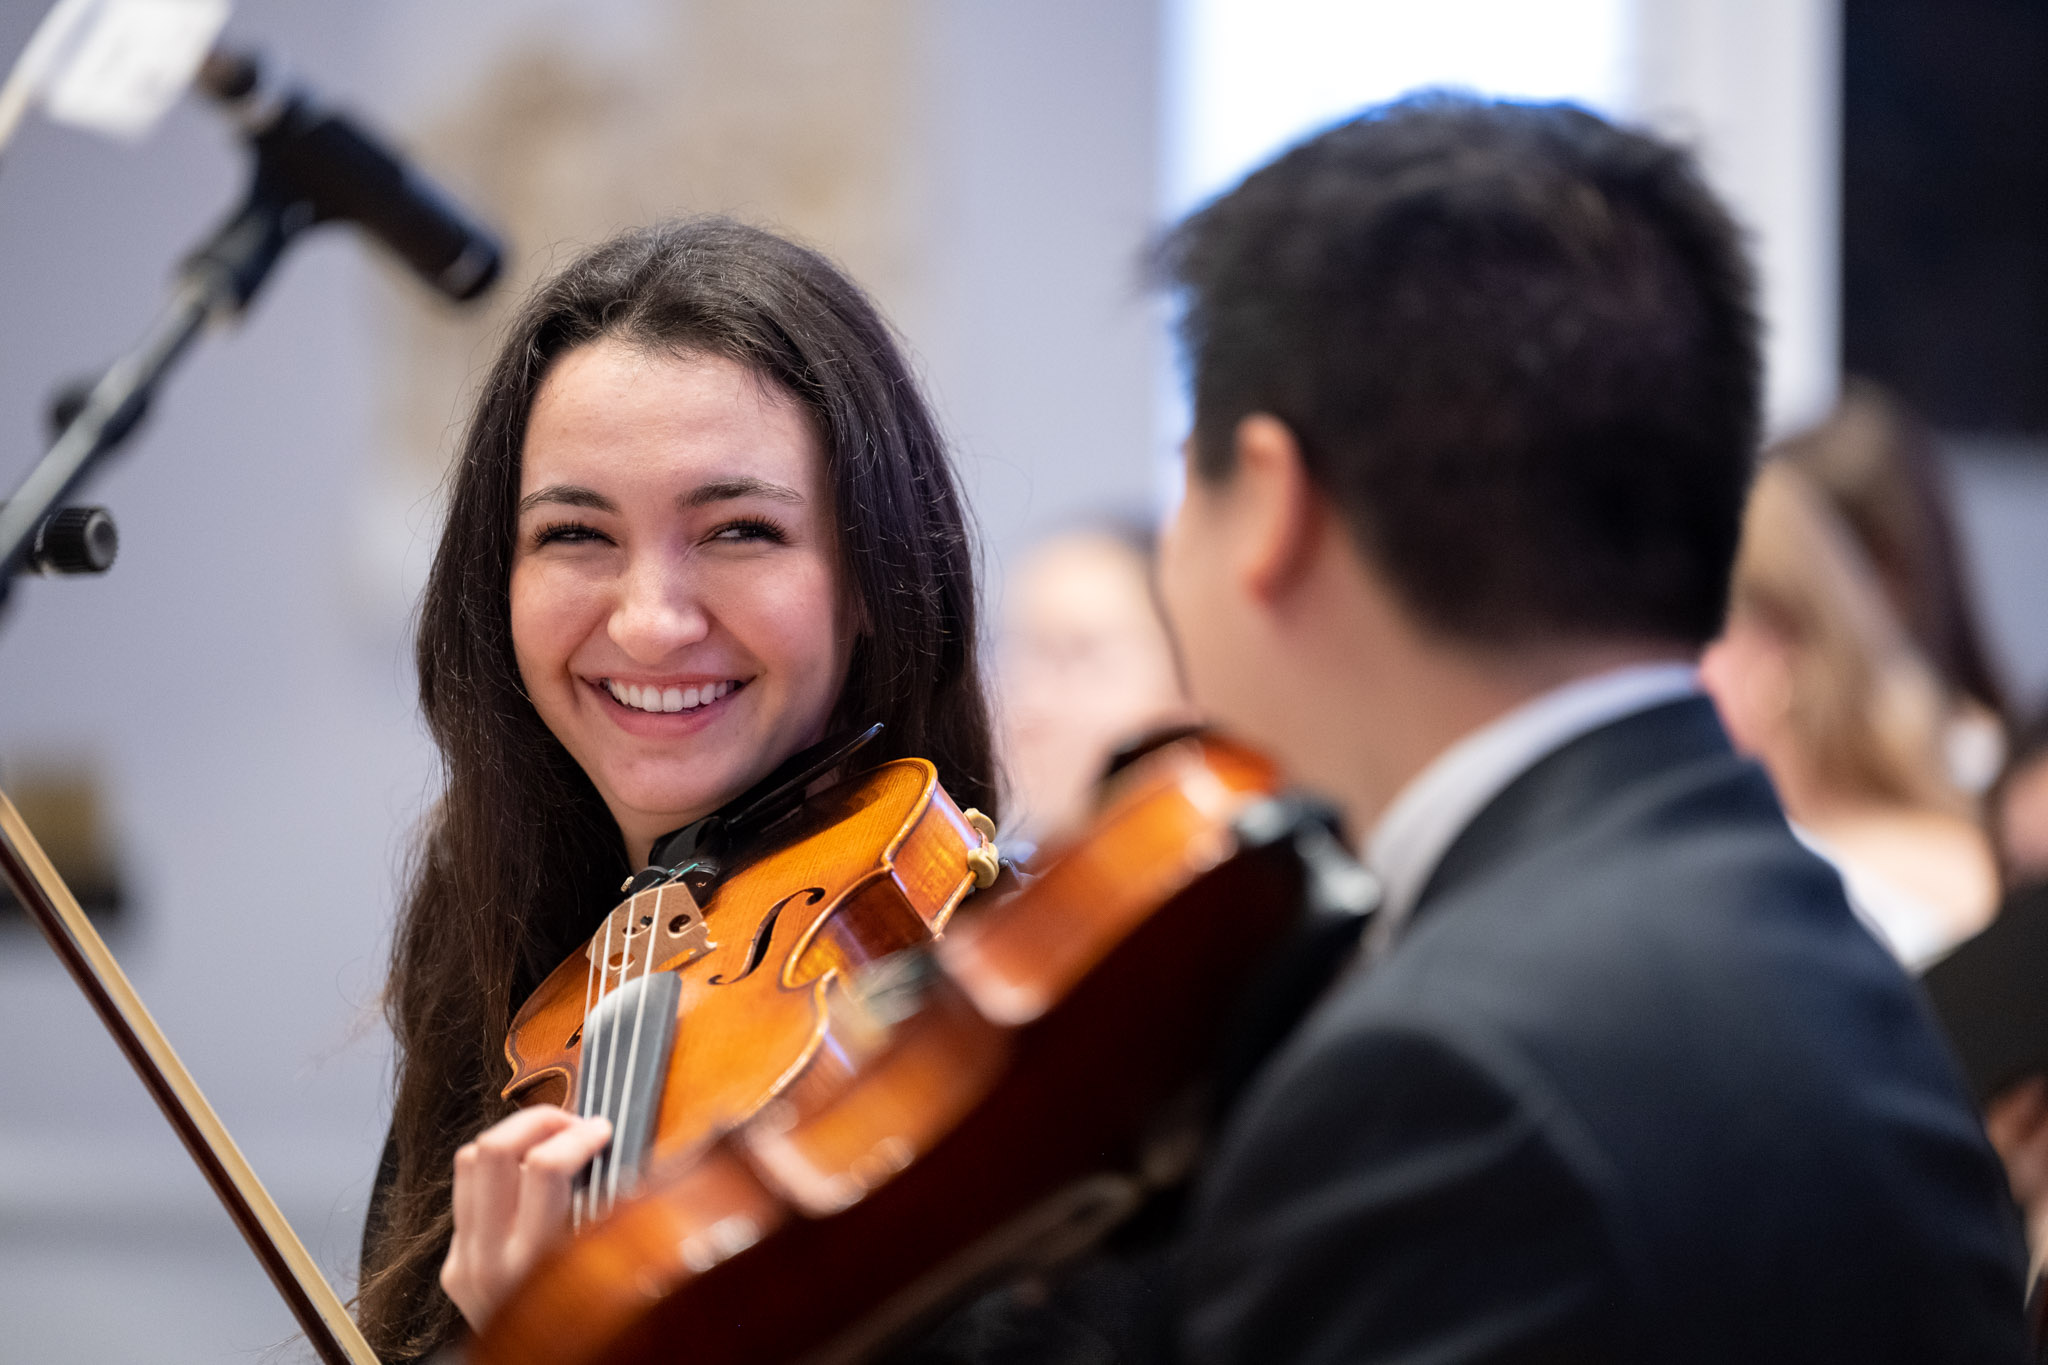 A student holding her violin smiles at a fellow musician